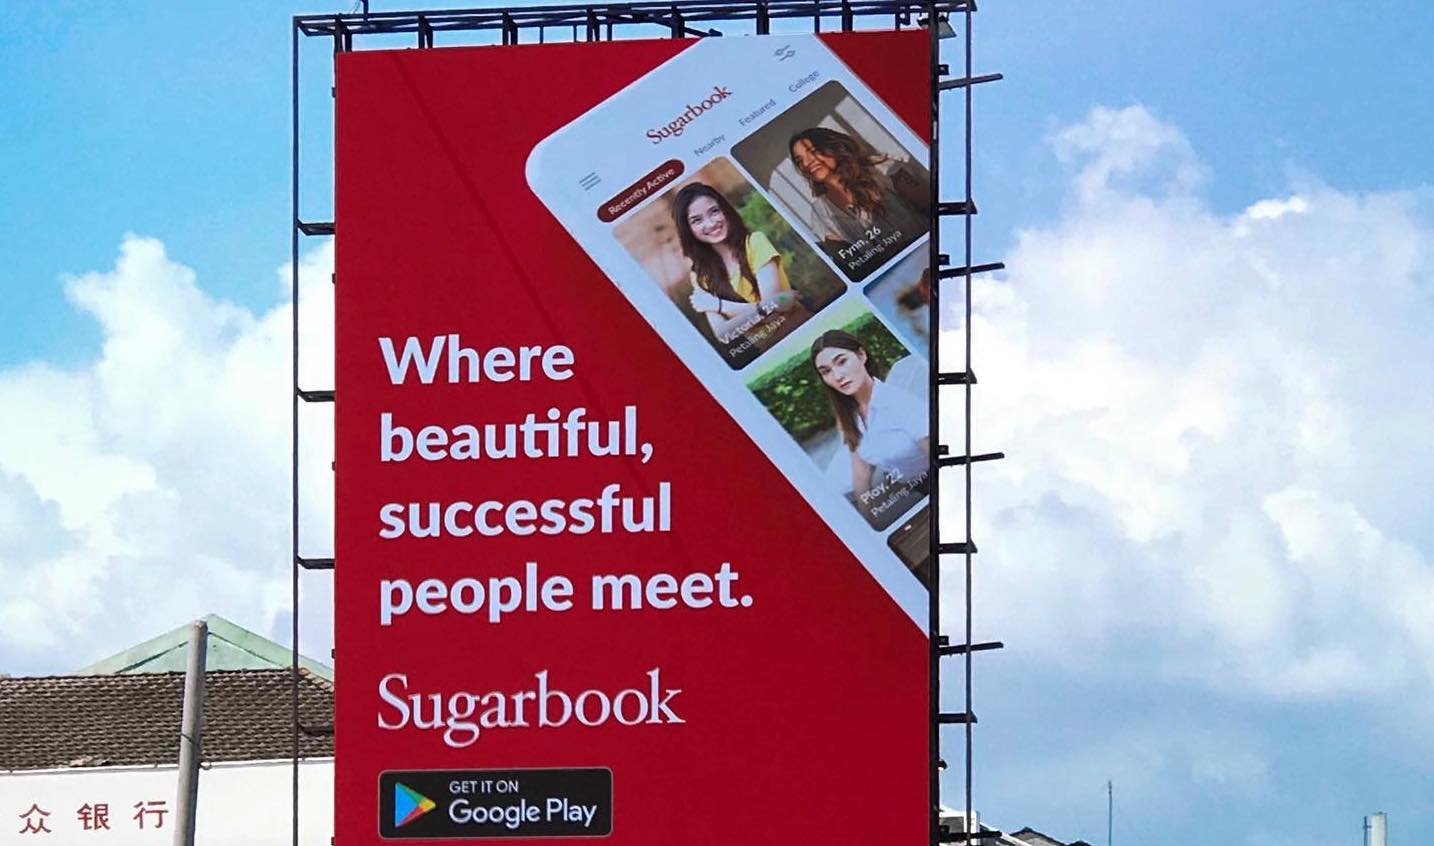 Do i need to pay for sugarbook?